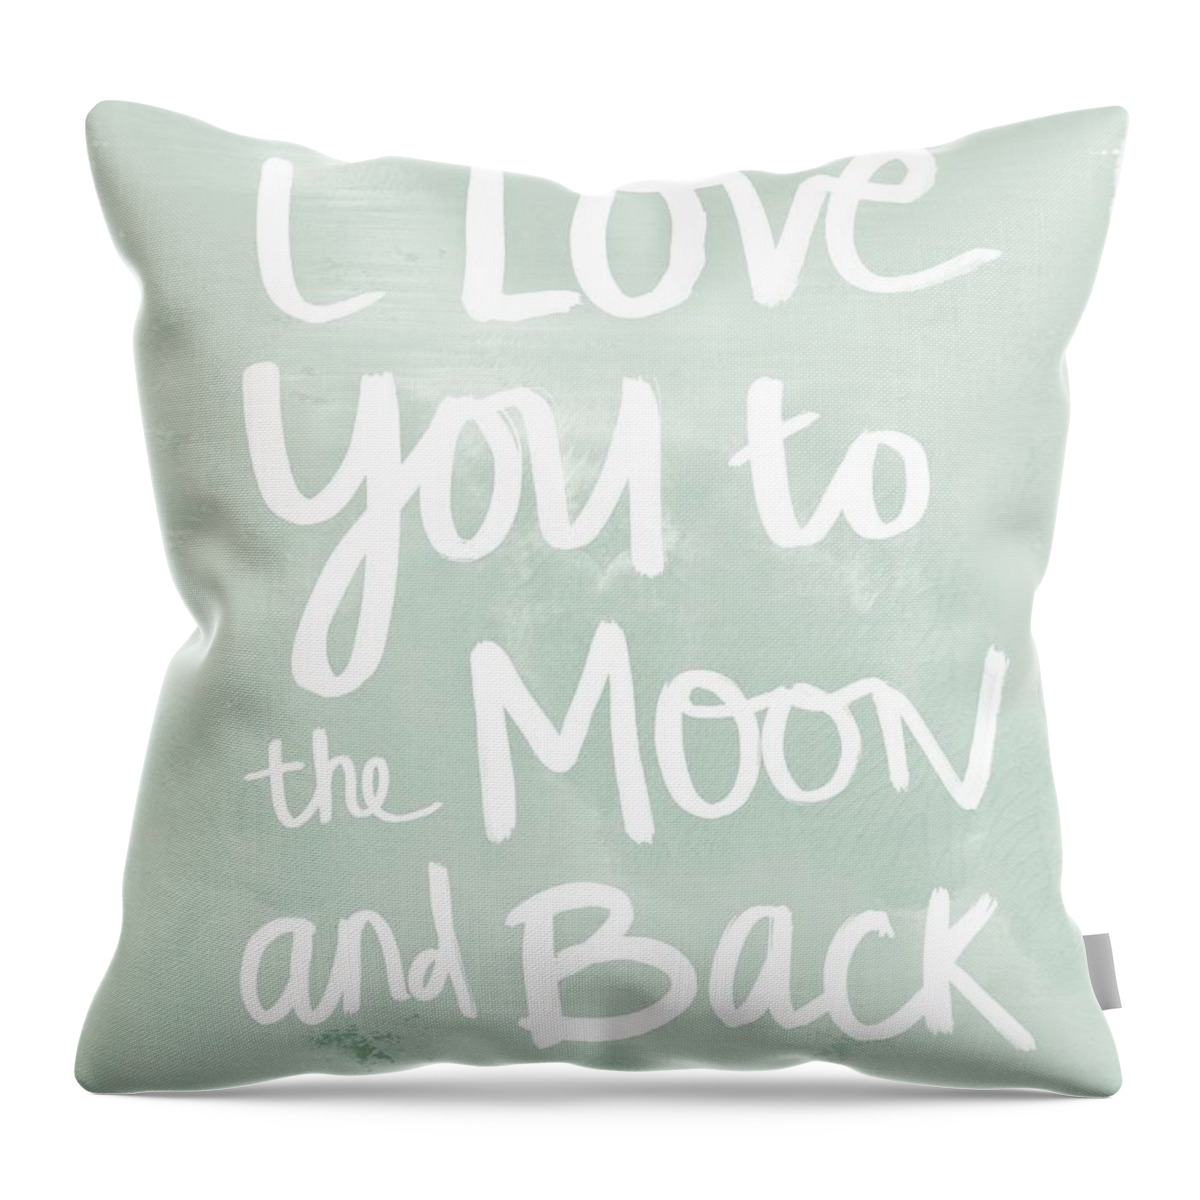 I Love You To The Moon And Back Throw Pillow featuring the painting I Love You To The Moon And Back- inspirational quote by Linda Woods